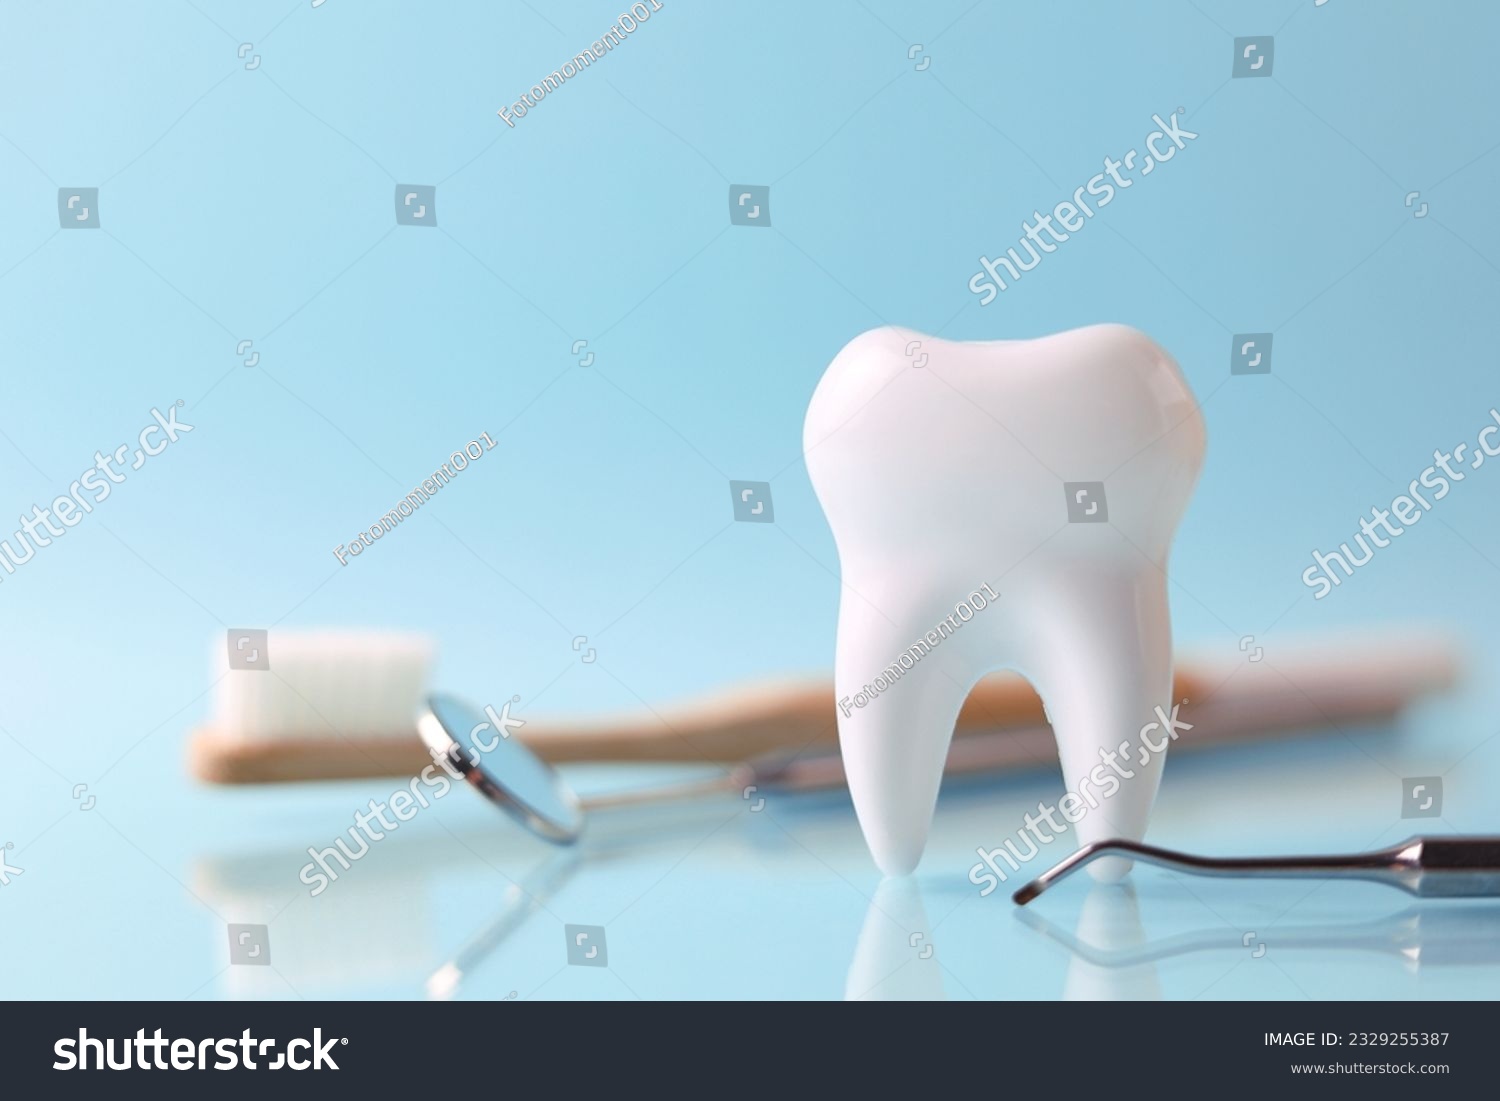 Dentistry concept. Model of a tooth and dental instruments on a colored background with space for text.  #2329255387